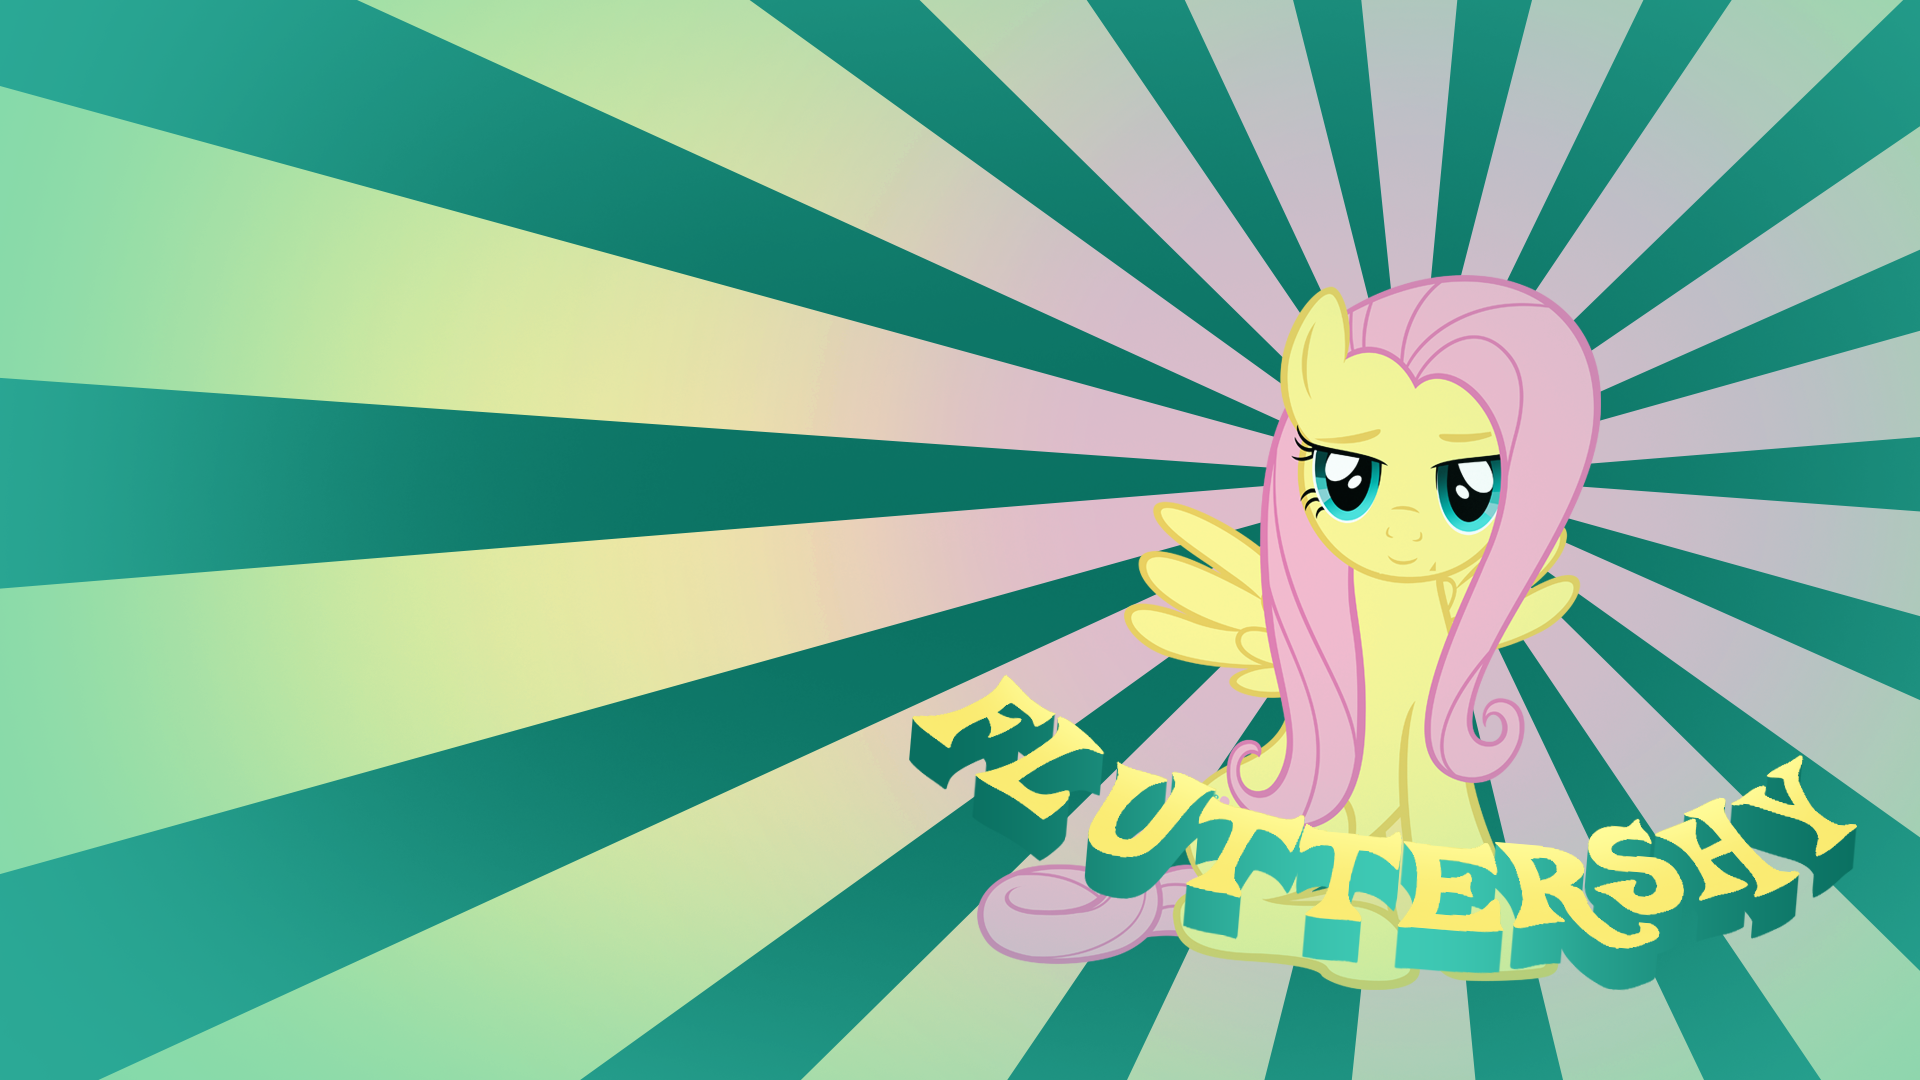 Simply Fluttershy - Wallpaper by GuruGrendo and MoongazePonies